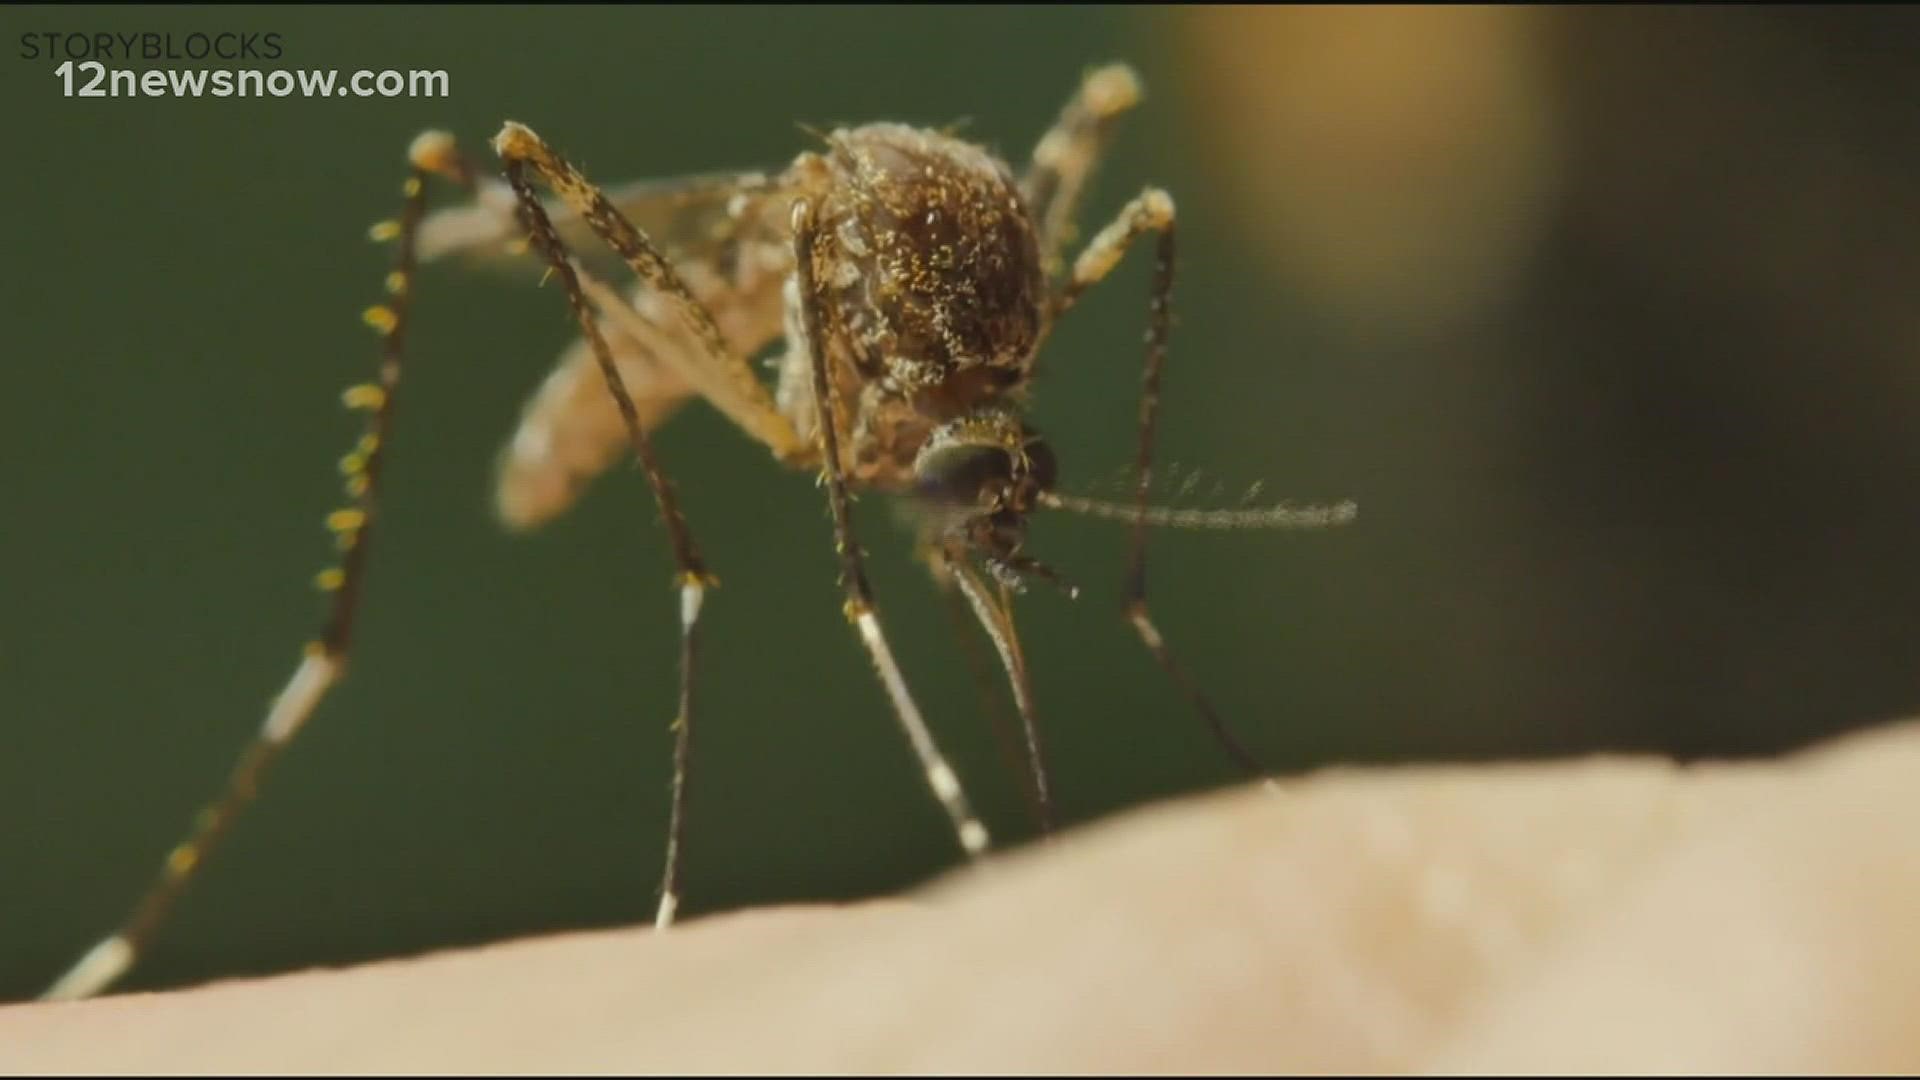 We're getting answers surrounding mosquito myths.